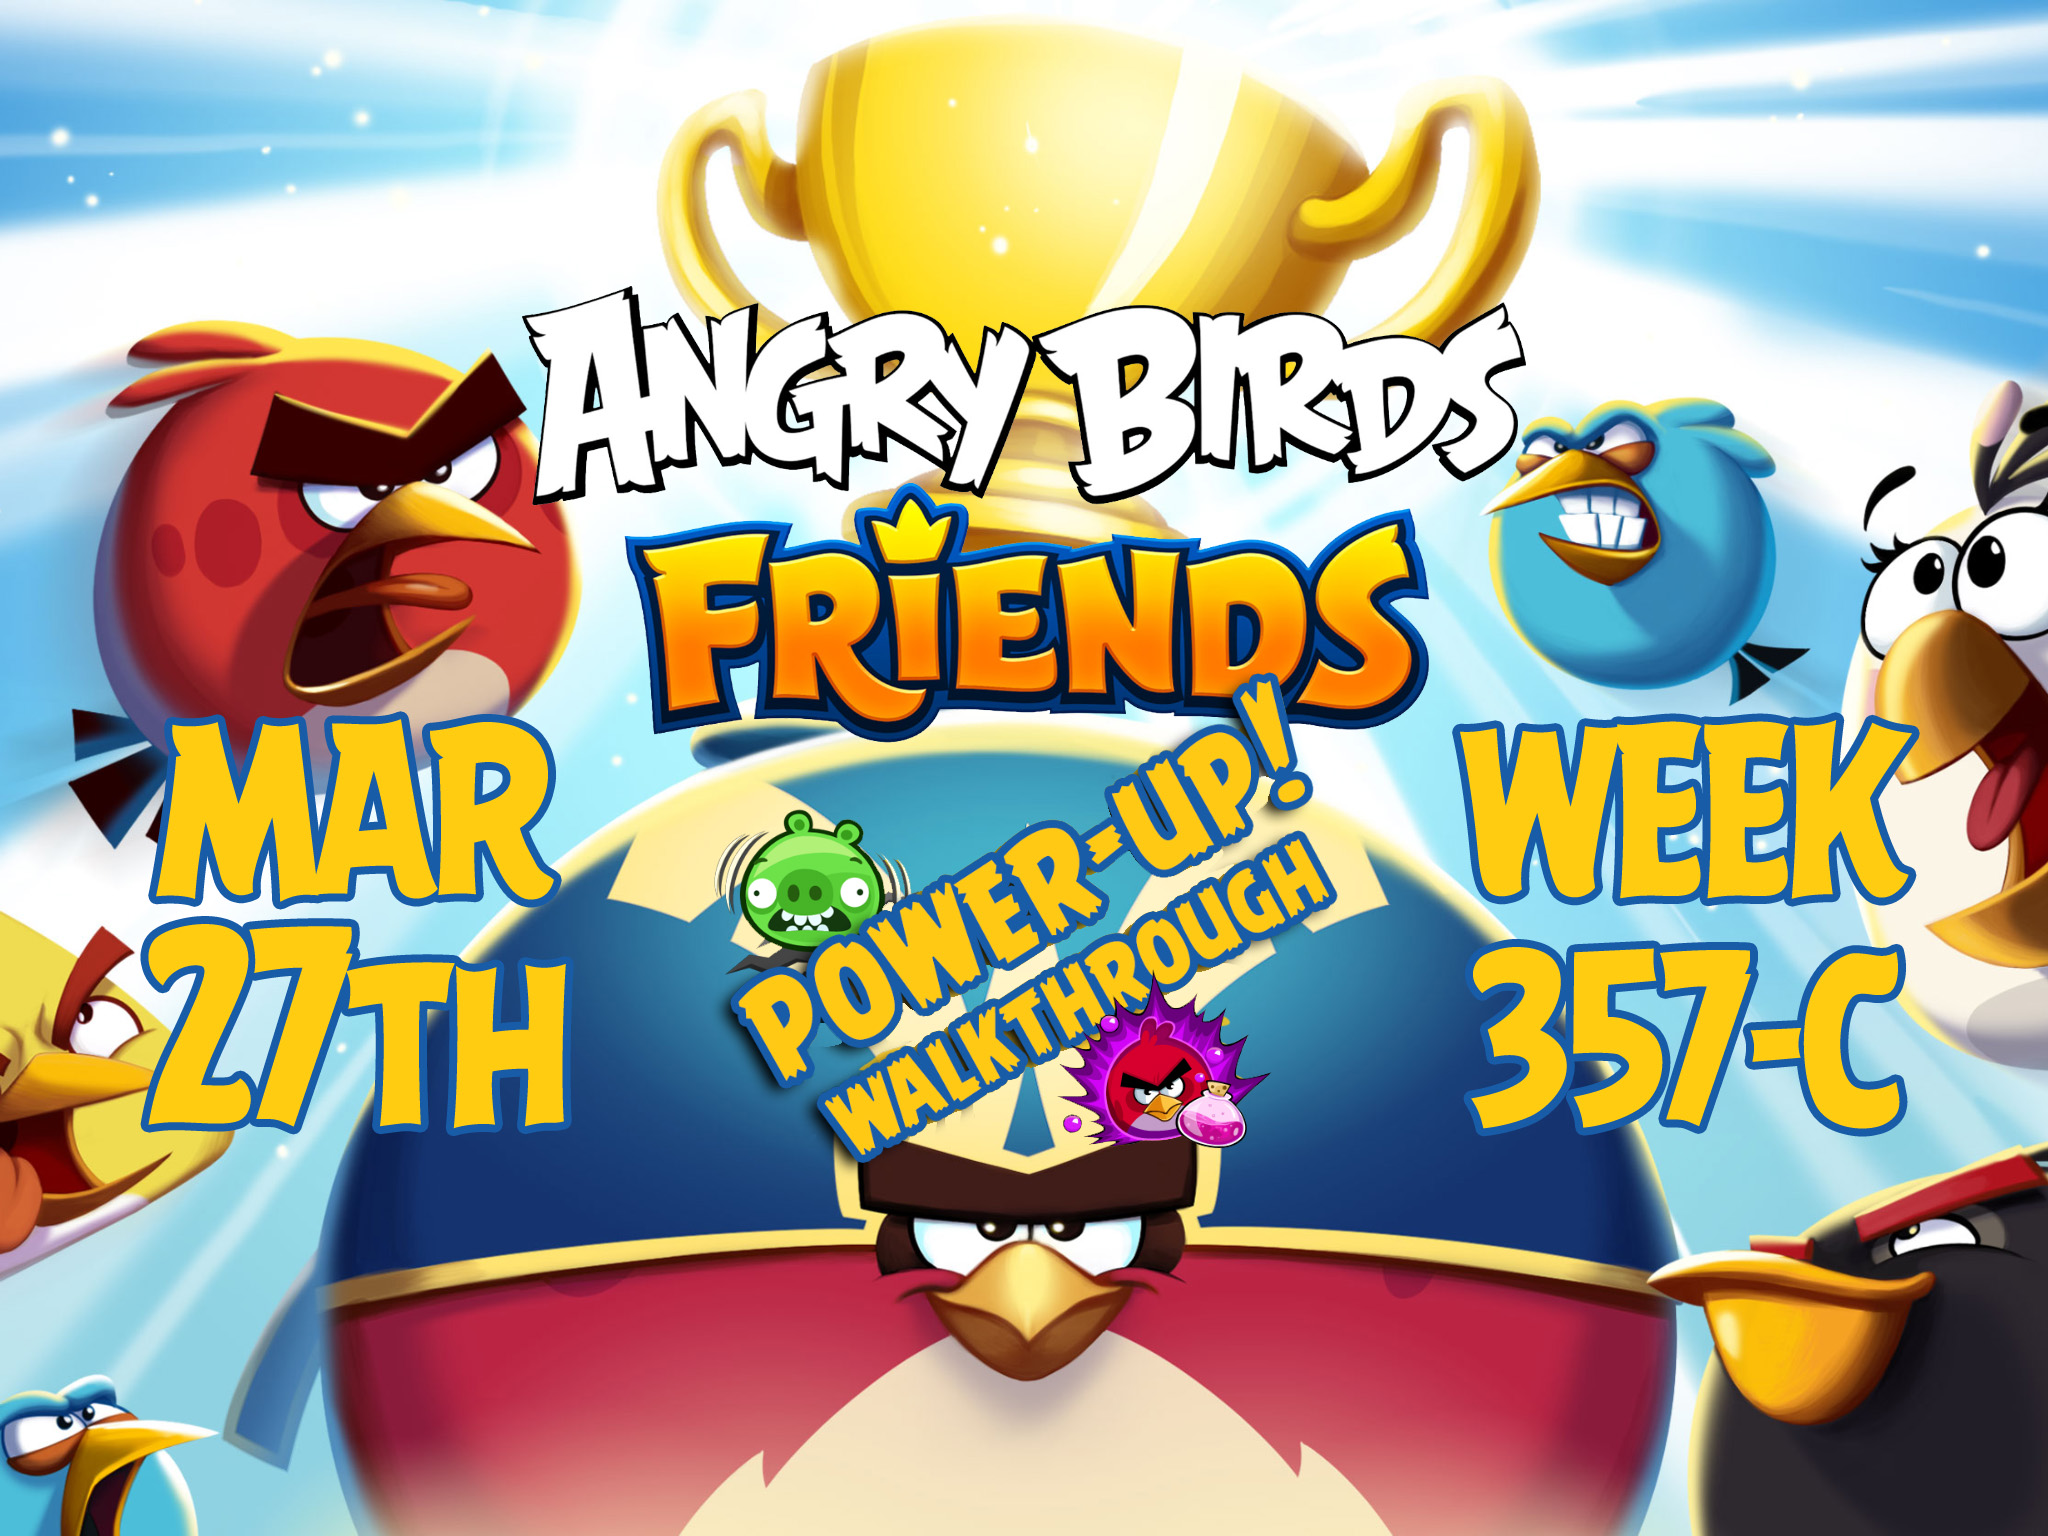 Angry-Birds-Friends-Tournament-Week-357-C-Feature-Image-PU